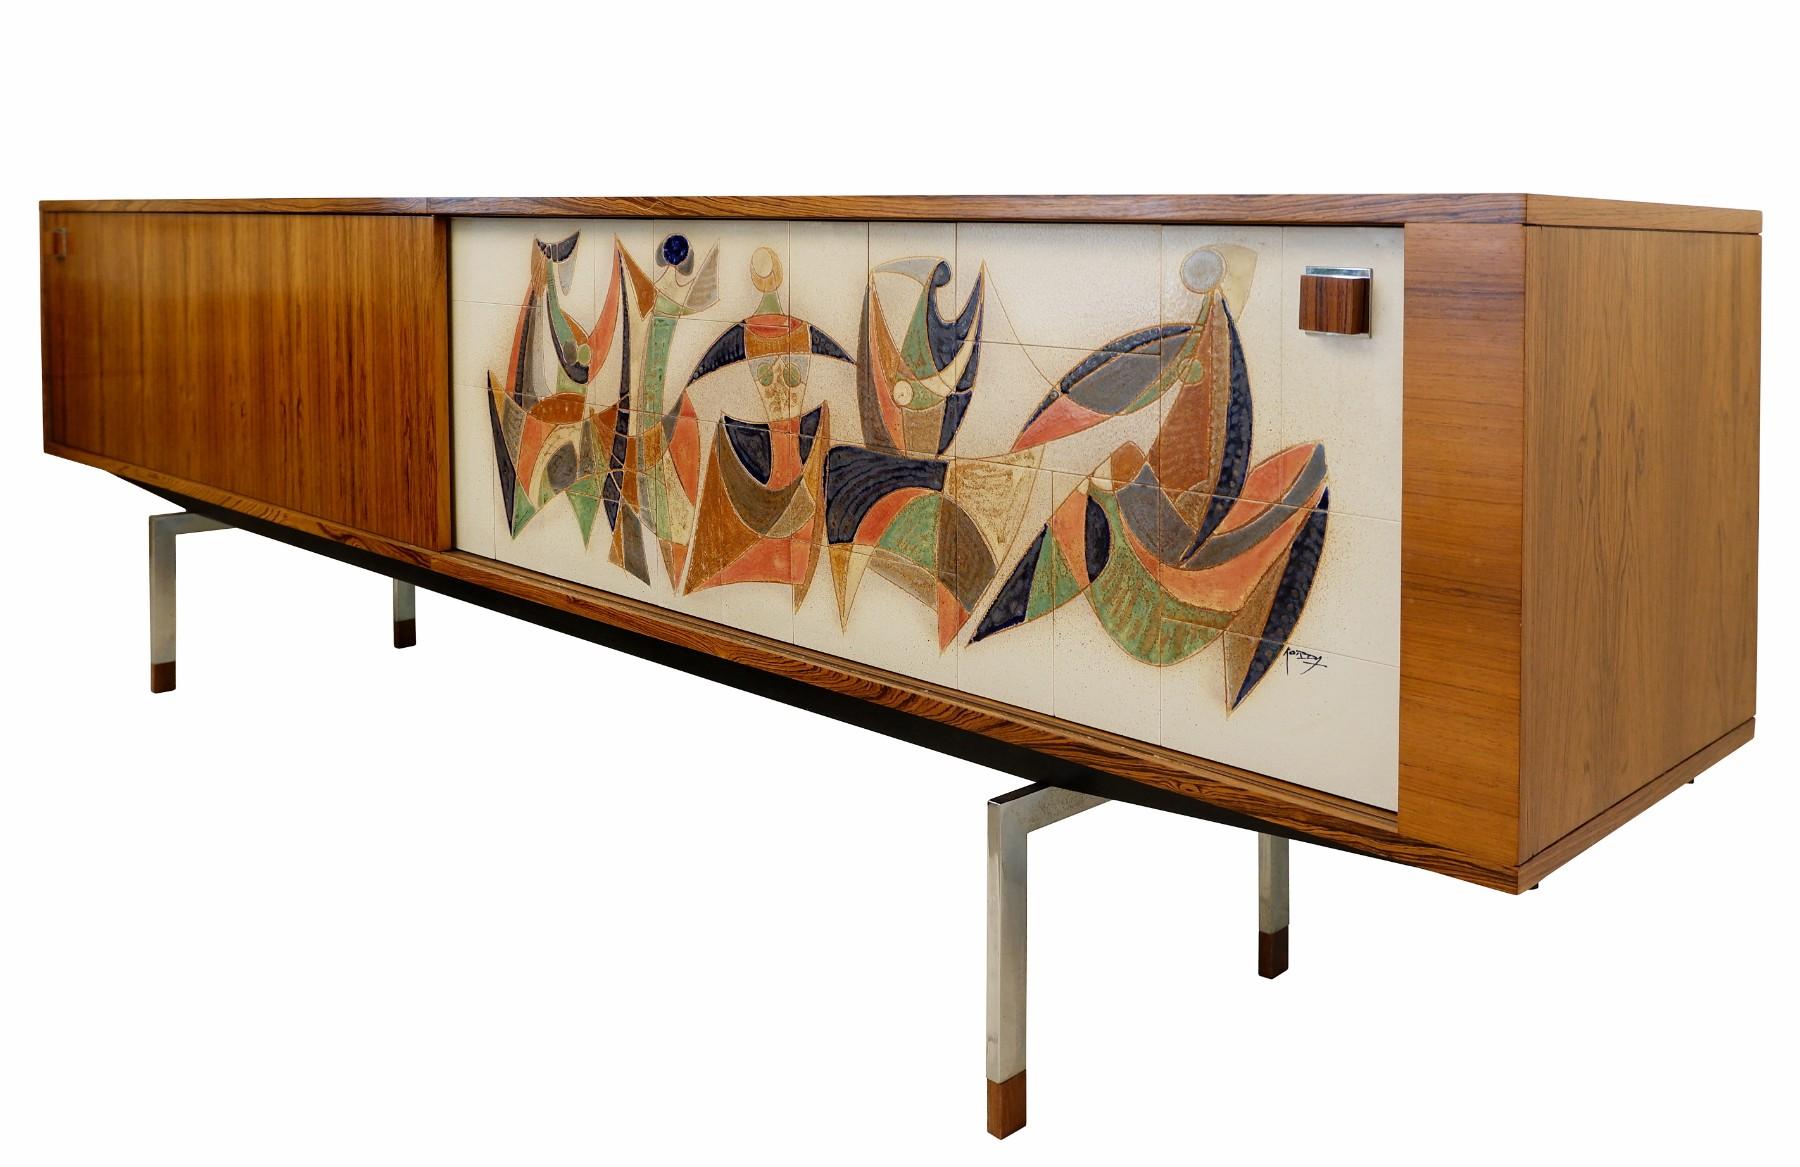 Extra long sideboard by Alfred Hendrickx for Belform, 1956.